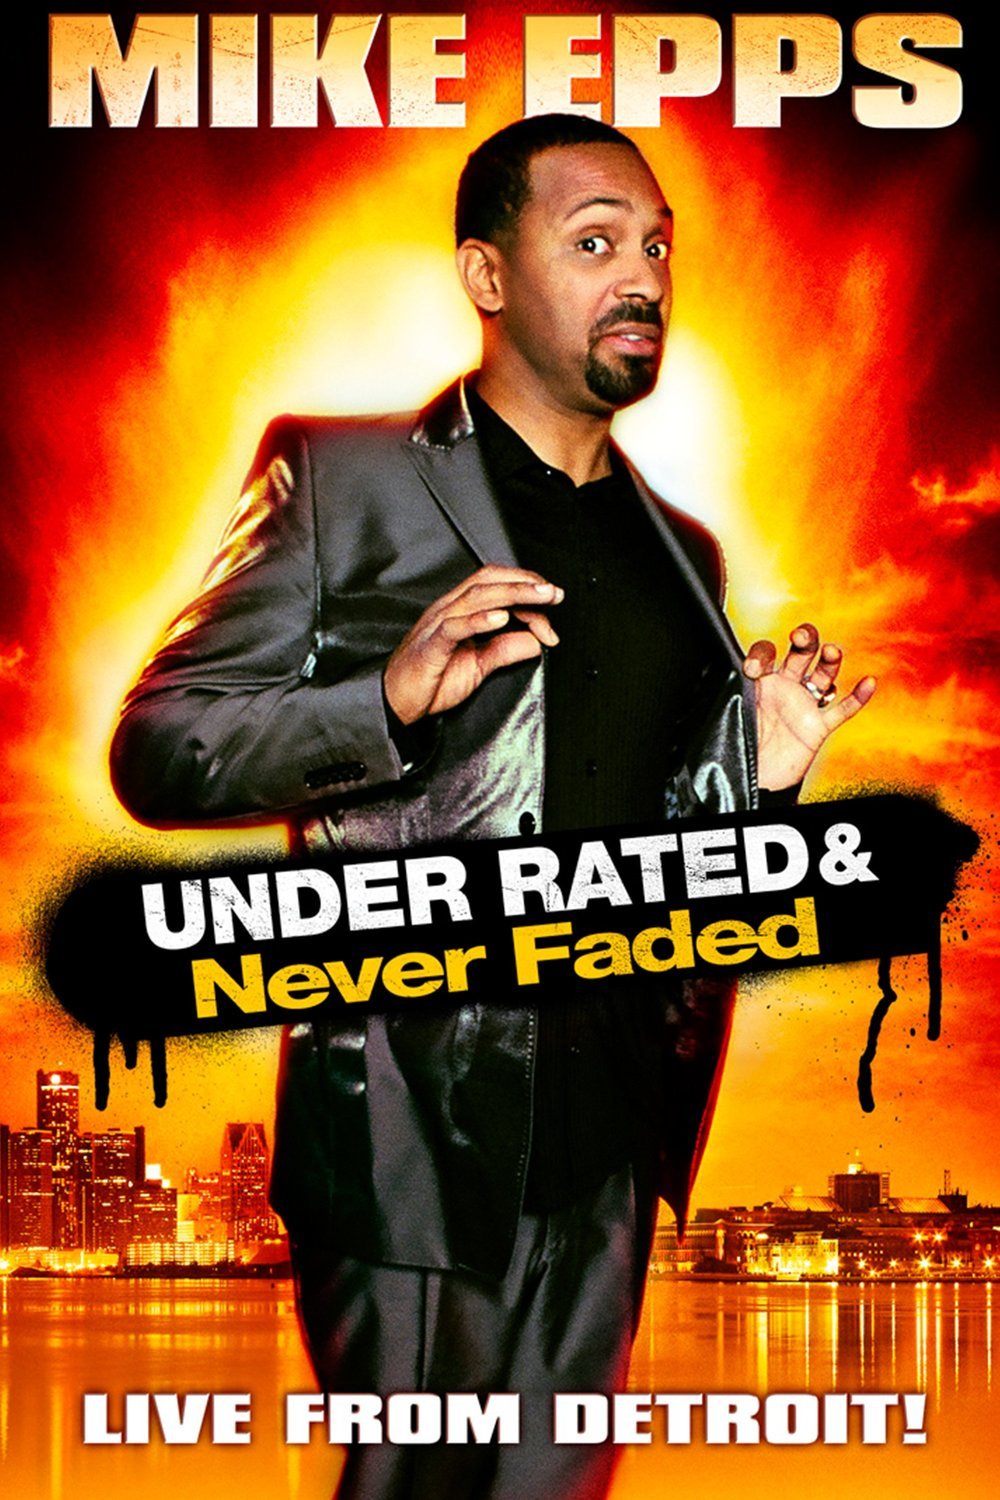 Poster of the movie Mike Epps: Under Rated & Never Faded